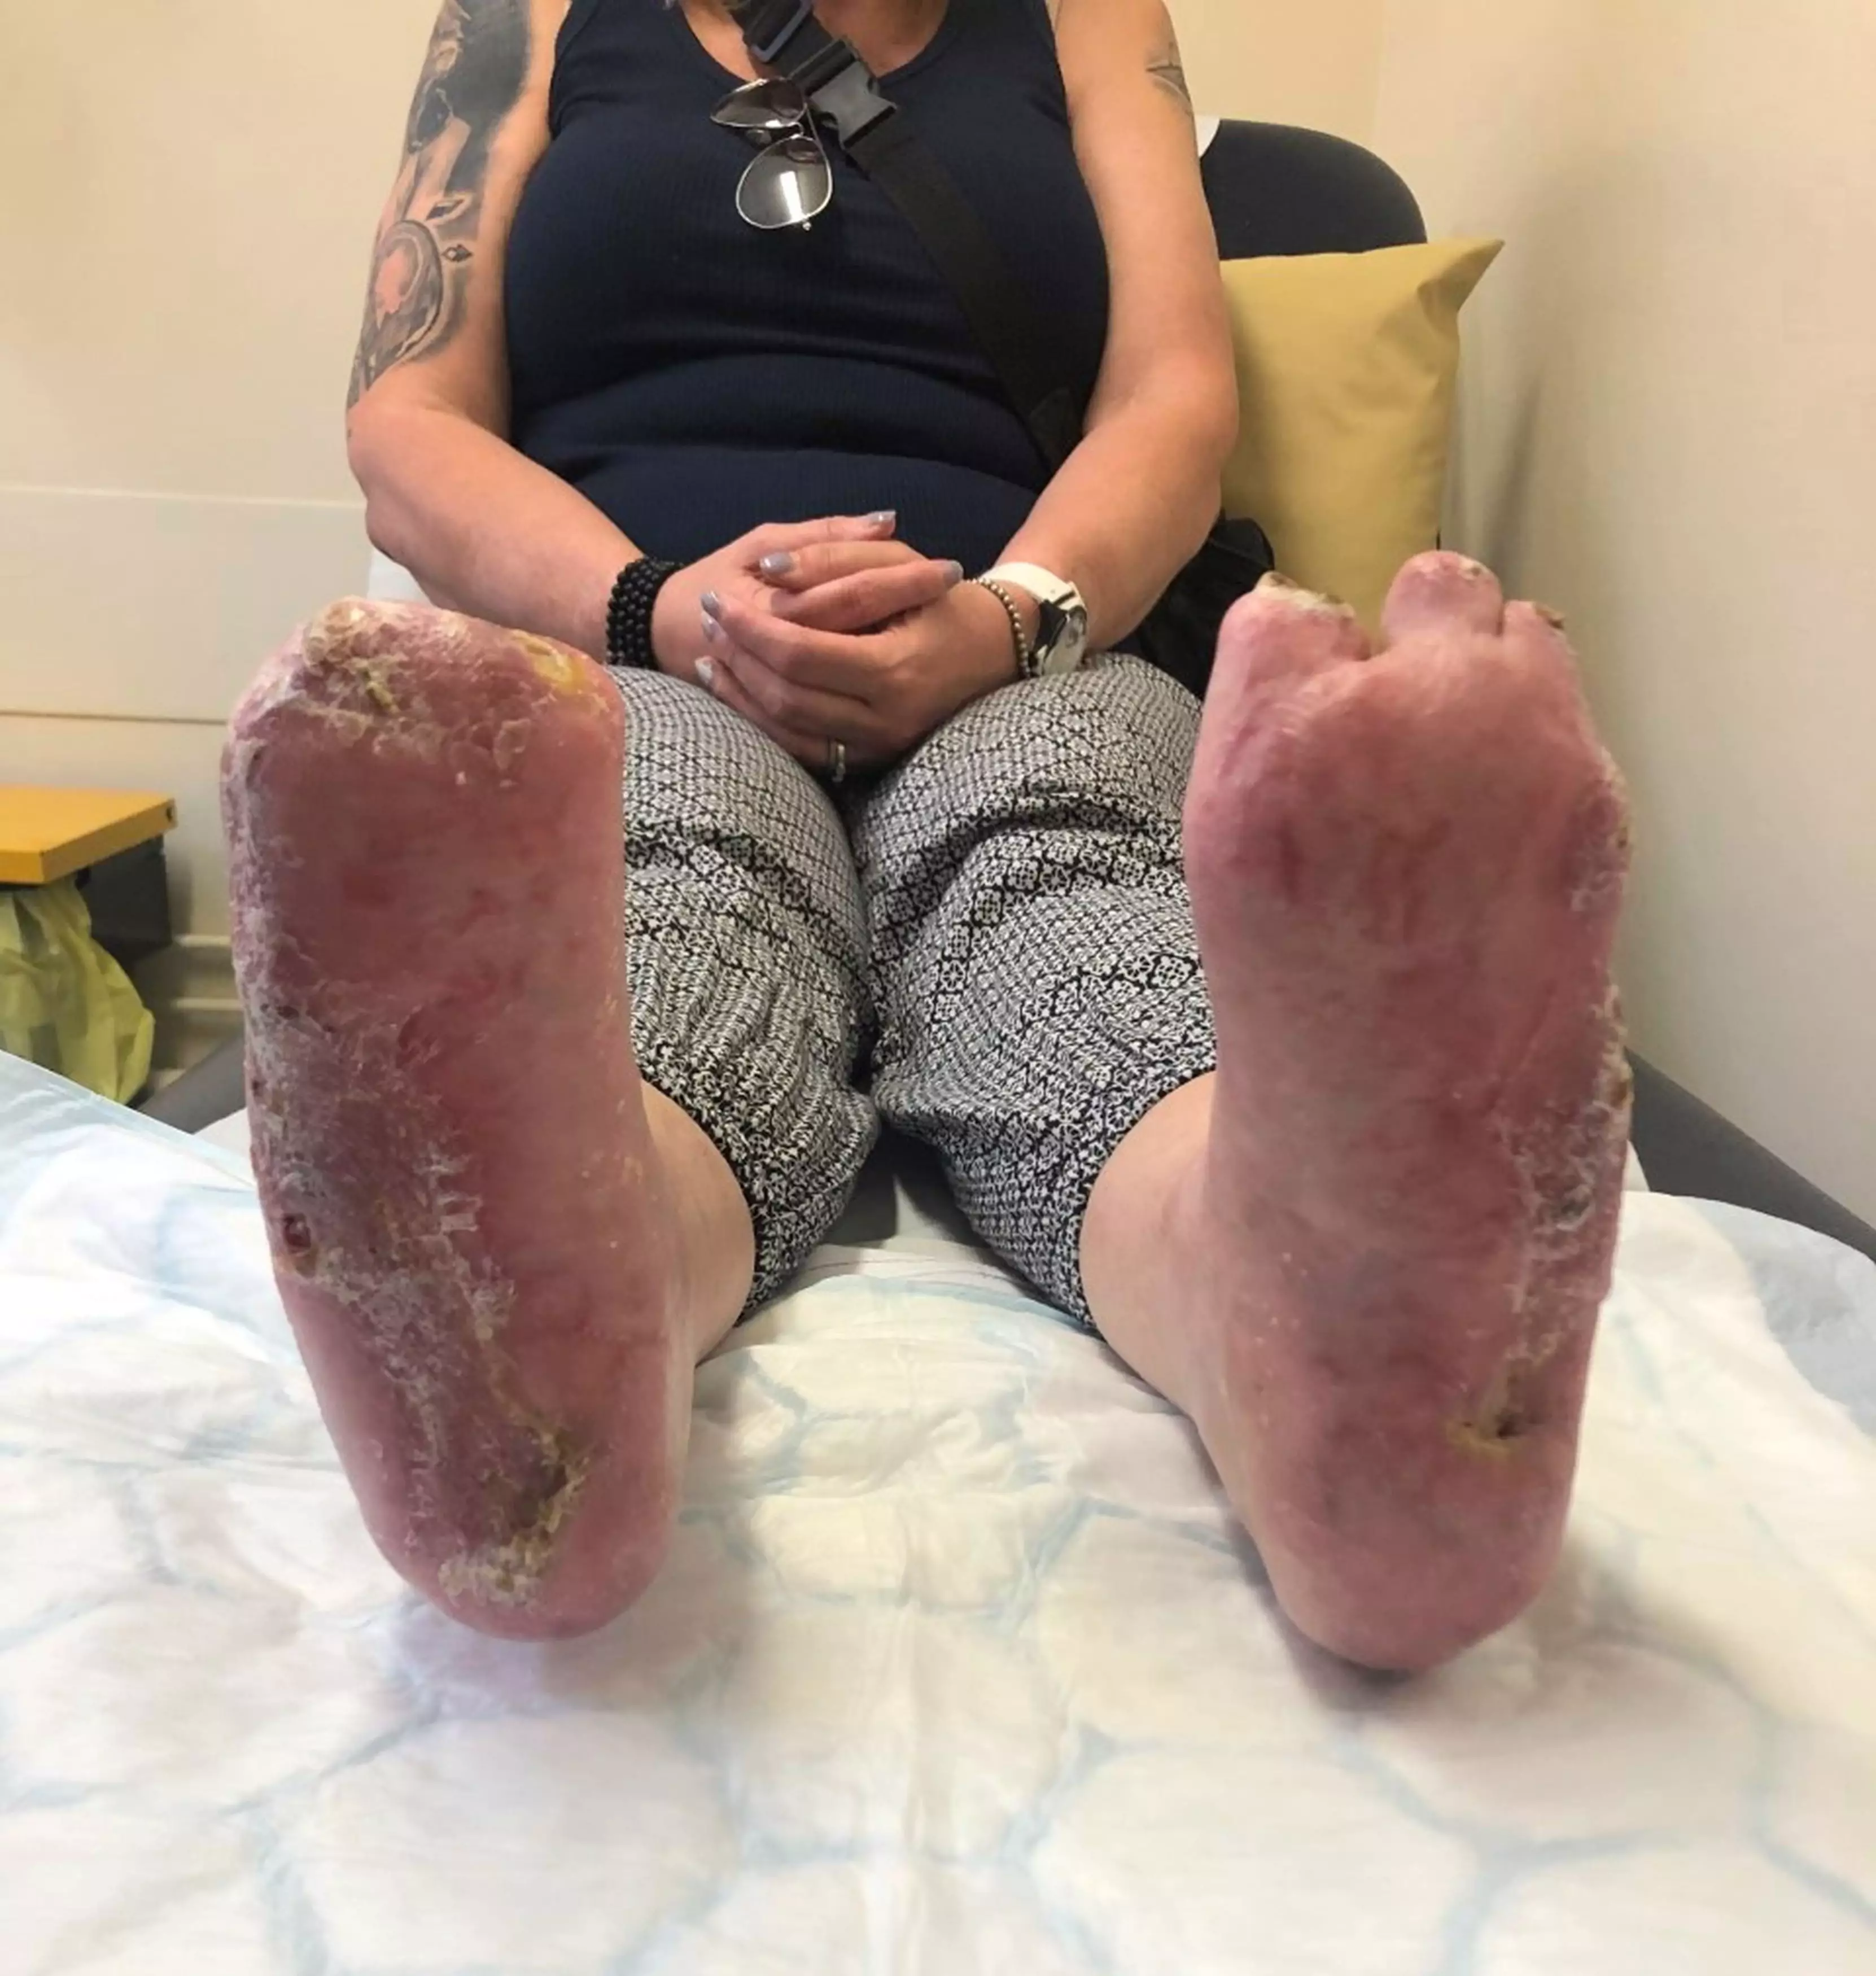 Ruth had to have her toes amputated after gangrene set in.